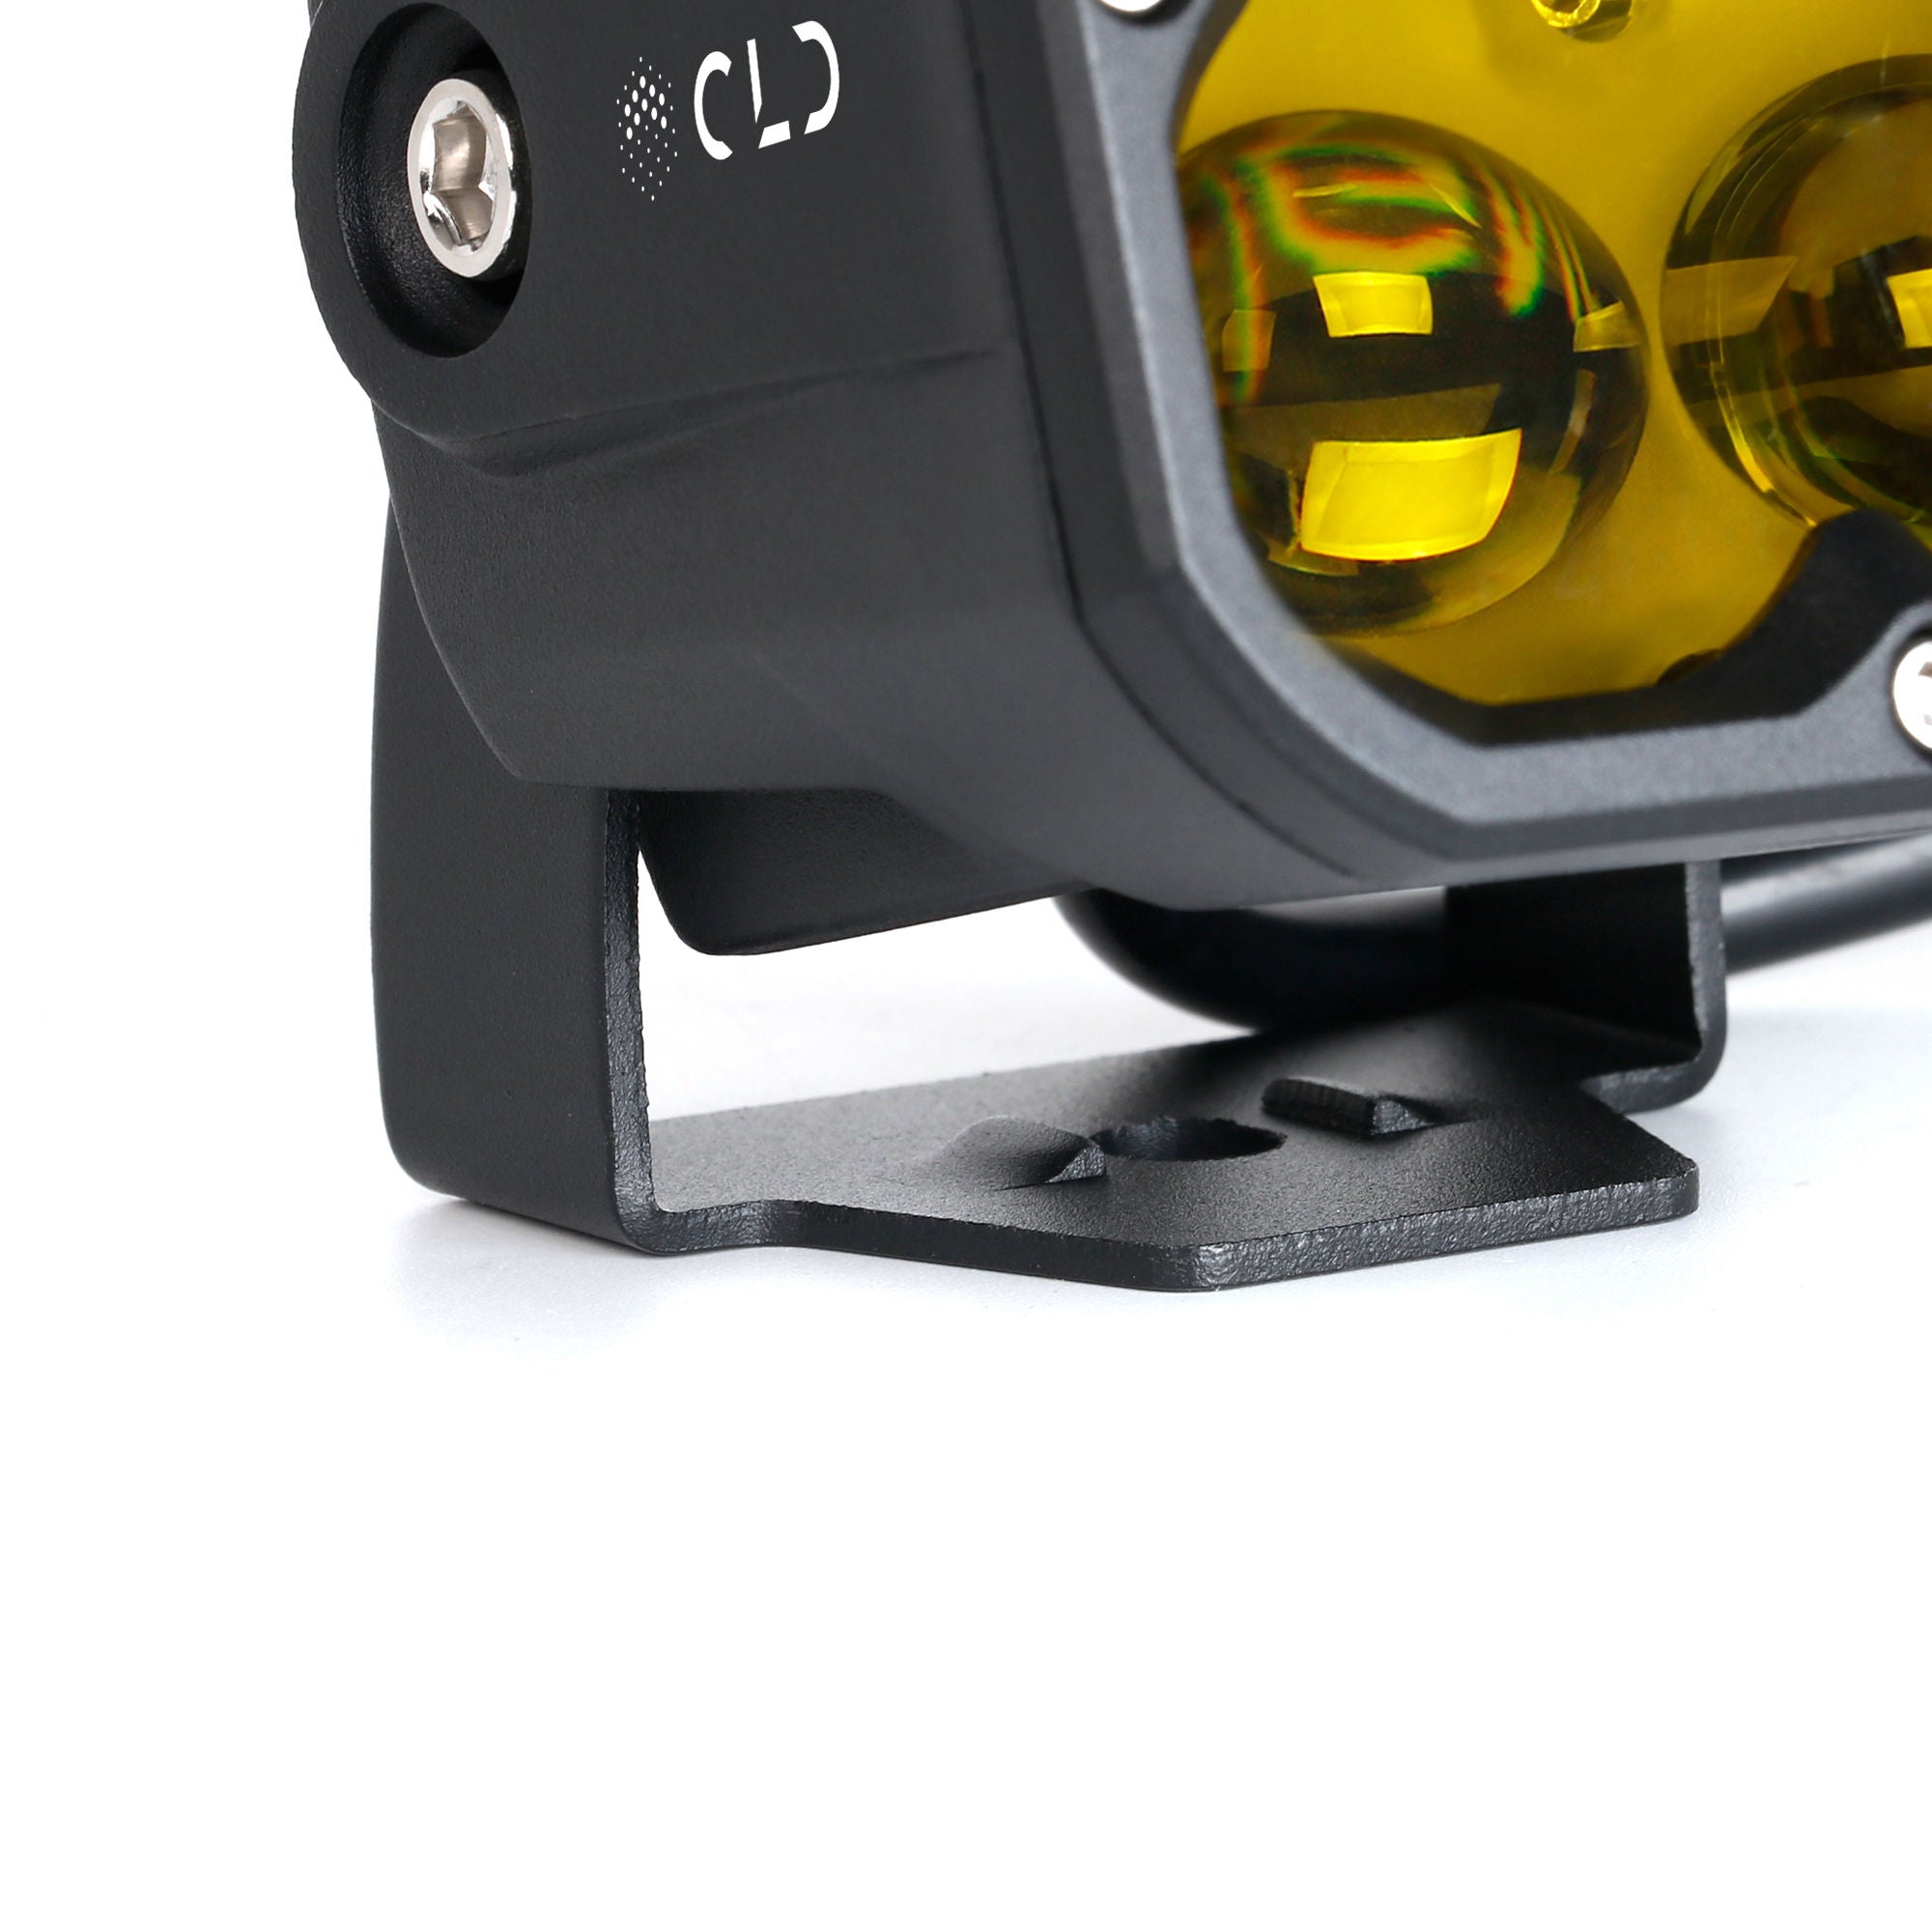 CLD CLDPCFGY - 3" Street Legal LED Pod Light - Auxiliary Square Fog Light w/Yellow Lens (620 Lumens)